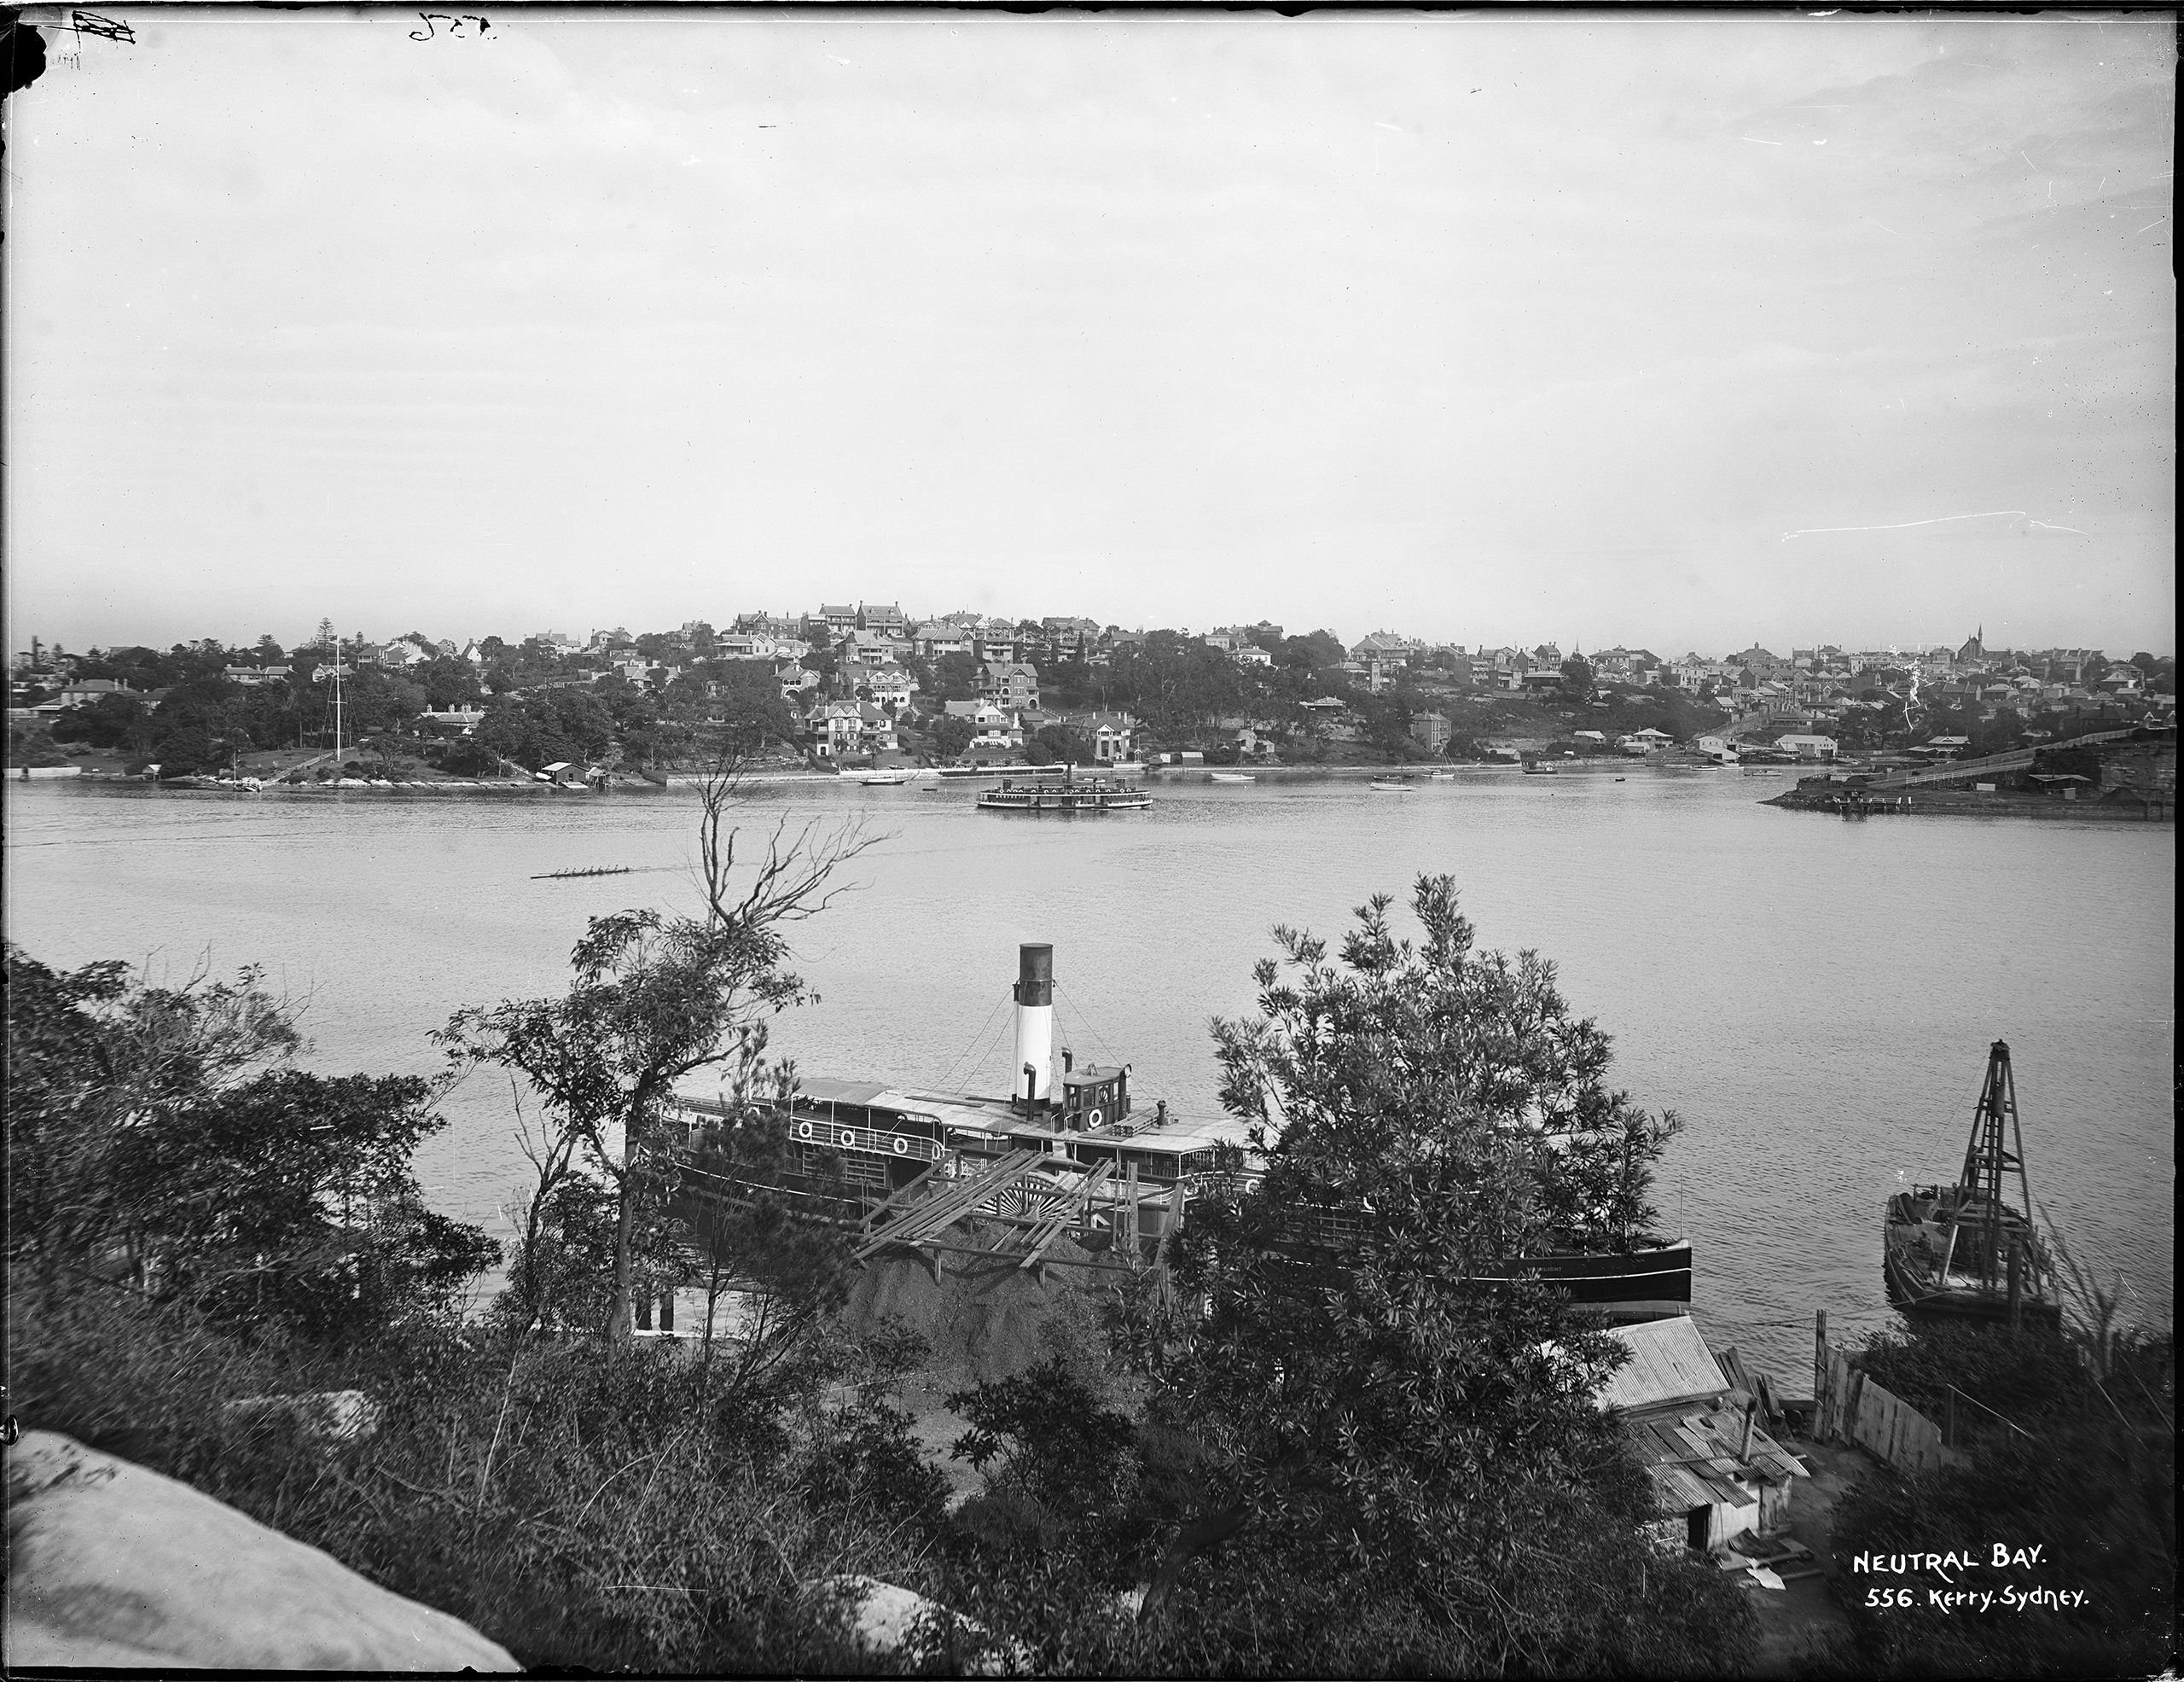 Photograph of Neutral Bay and Careening Cove, NSW, 1908-1914